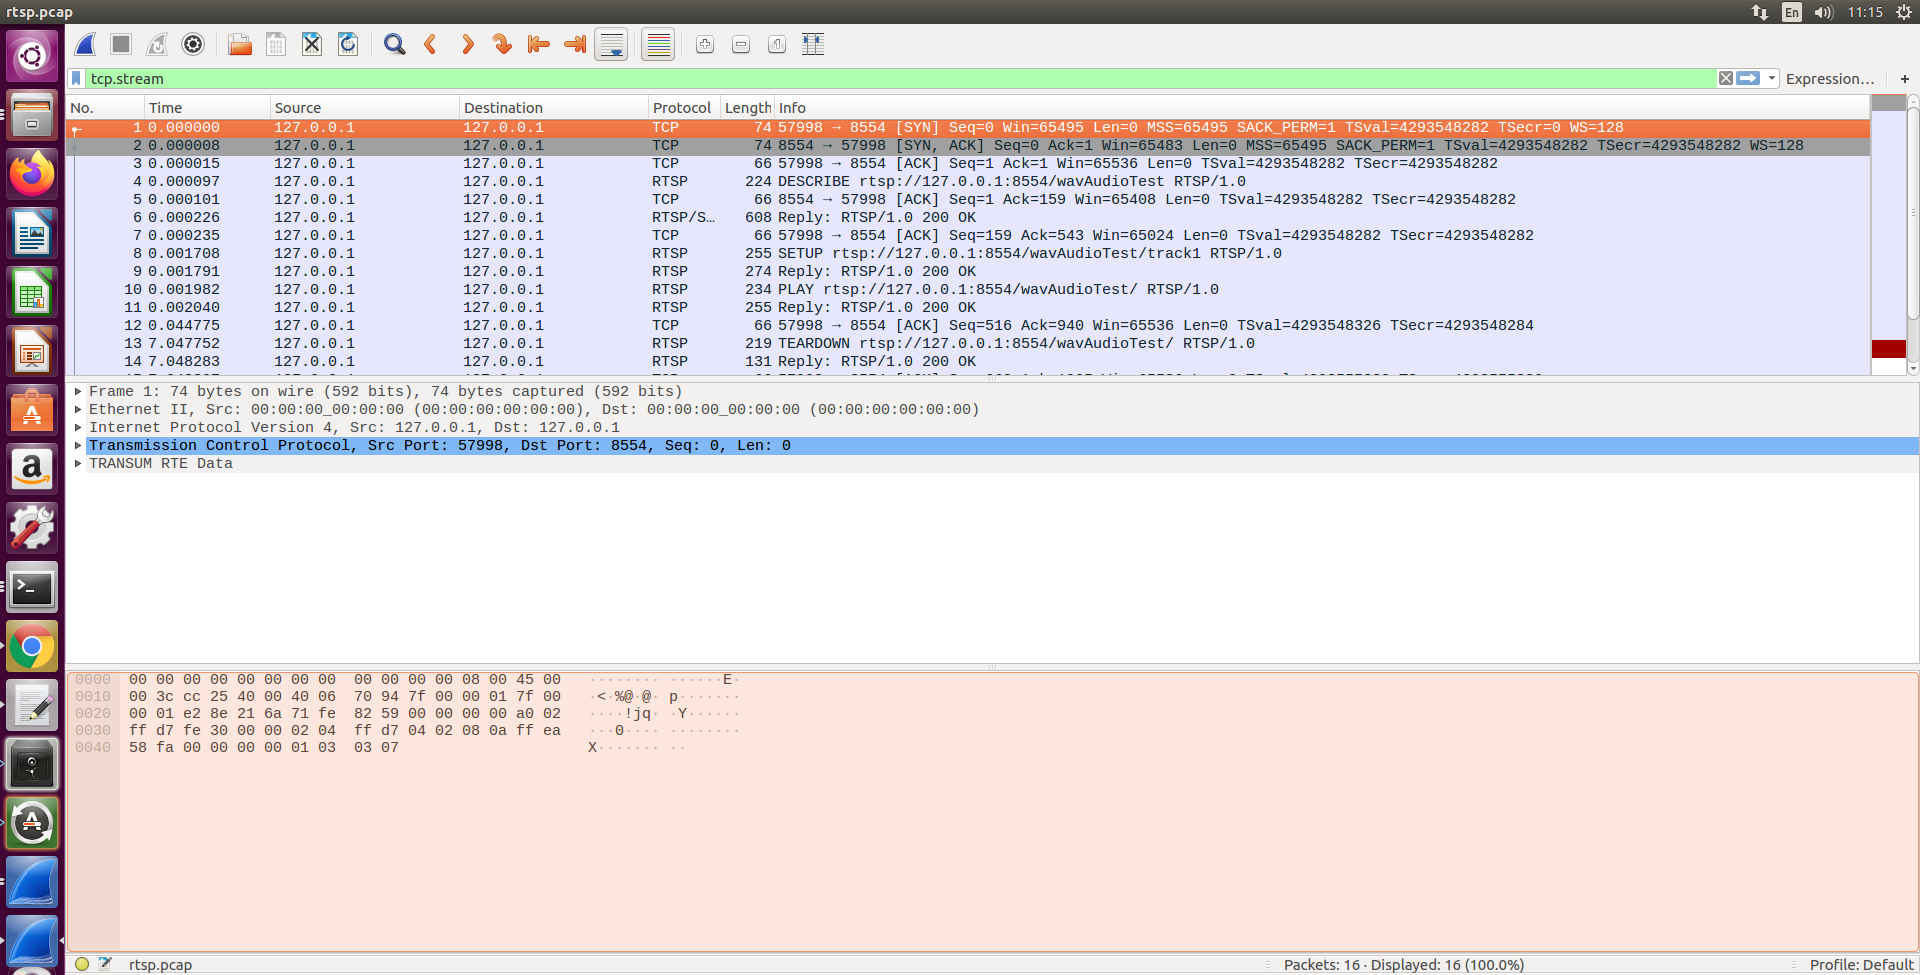 Analyzing the pcap file with Wireshark